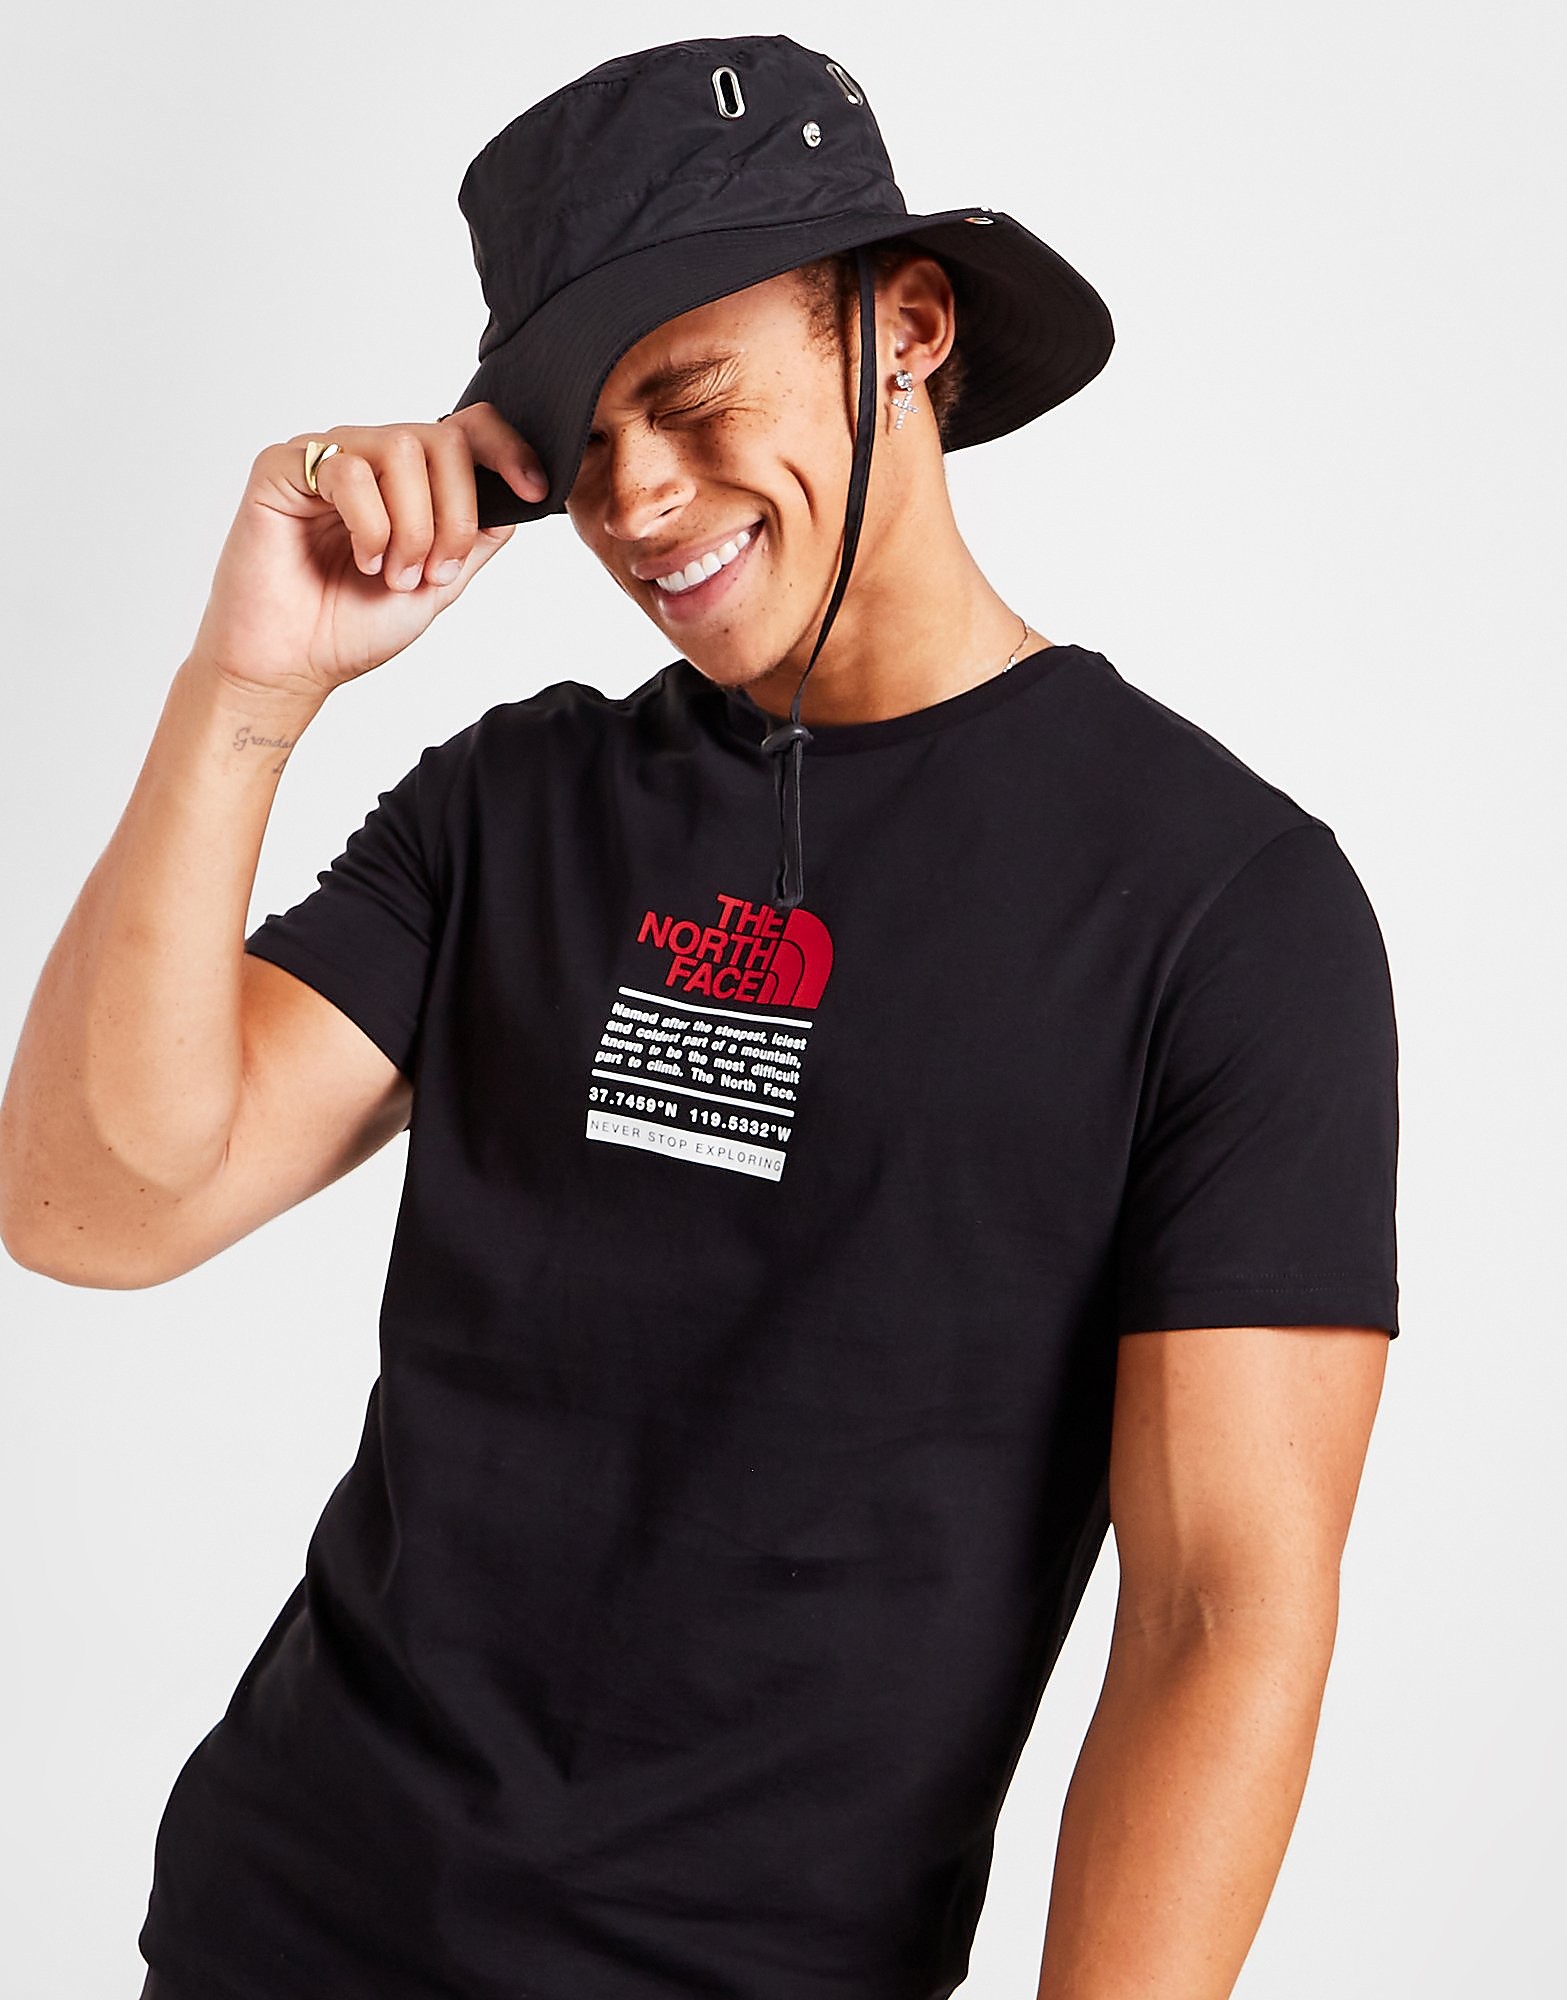 The North Face T-Shirt Notes - Only at JD - Preto - Mens, Preto